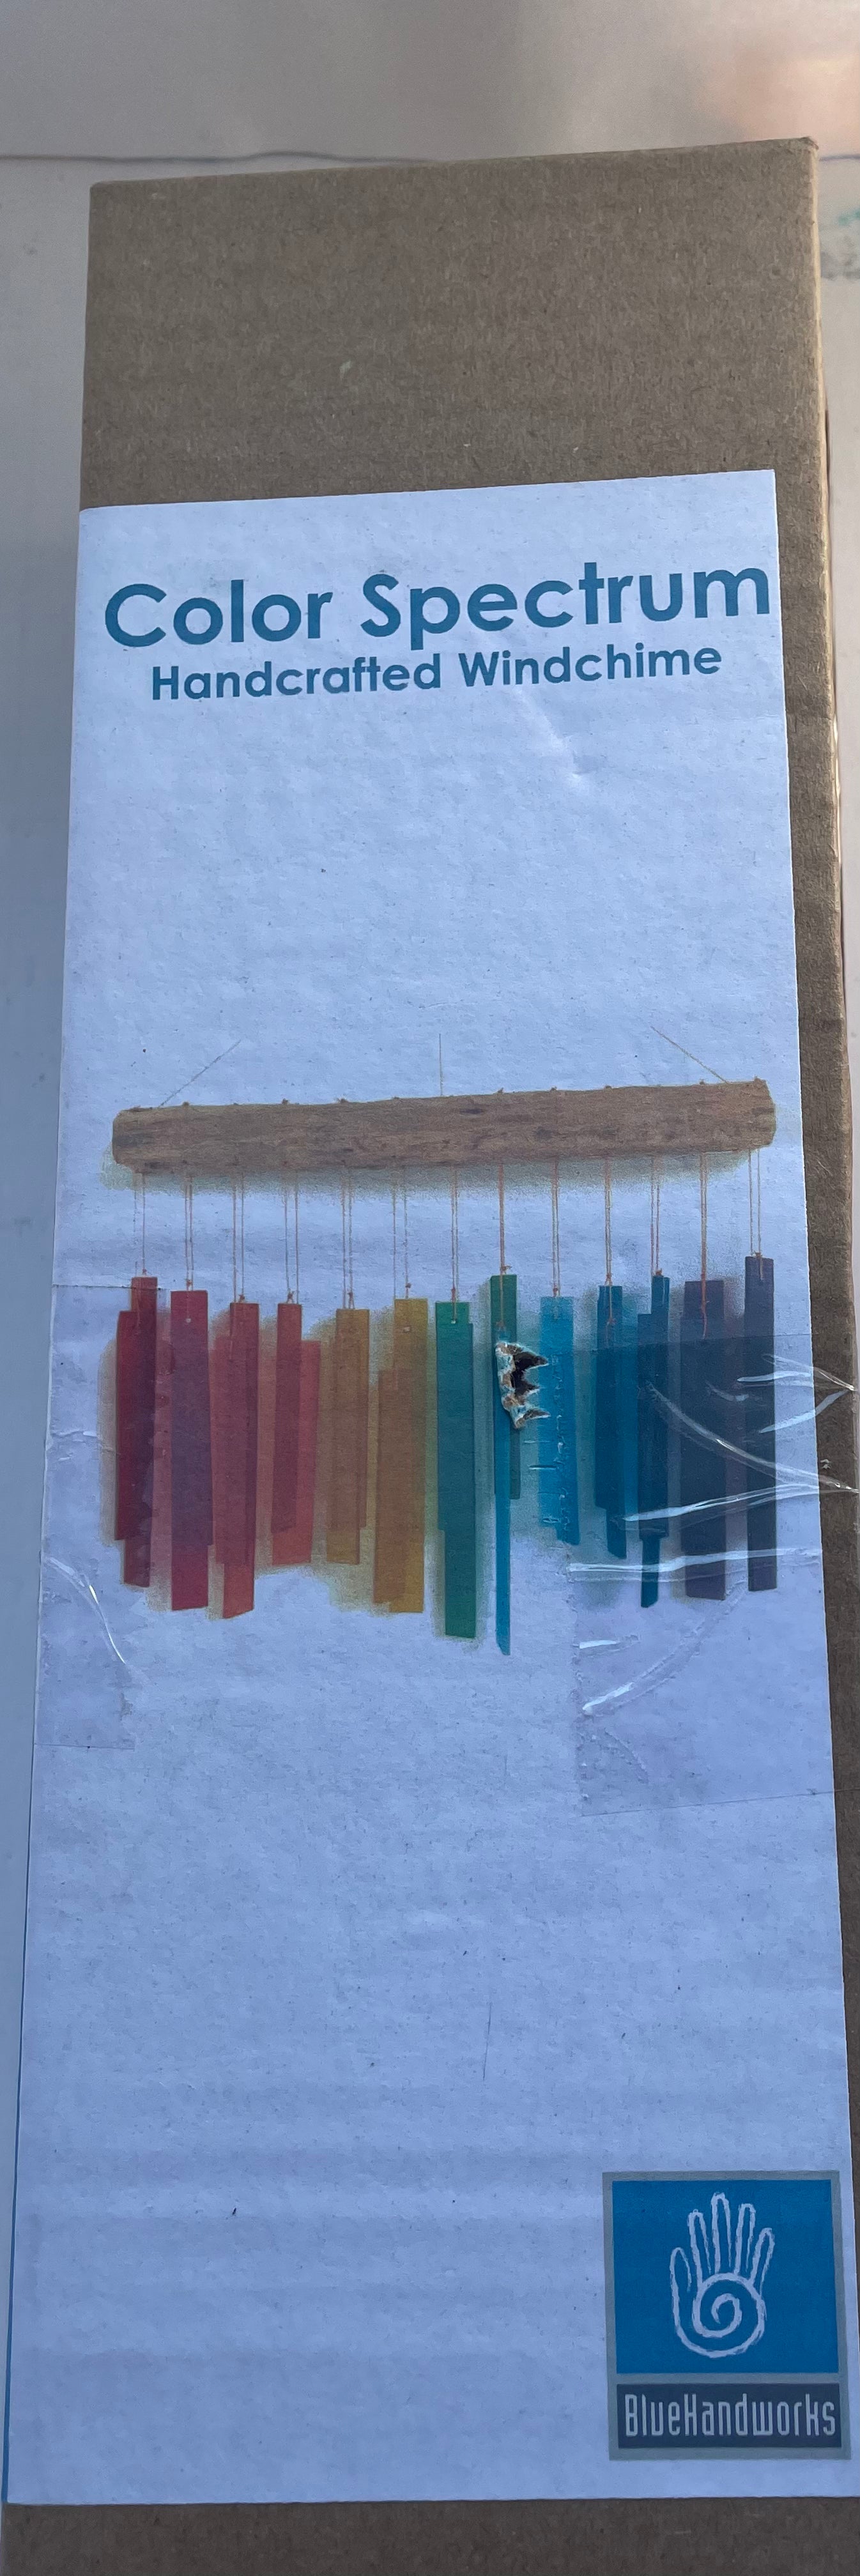 Driftwood and glass rainbow wind chime